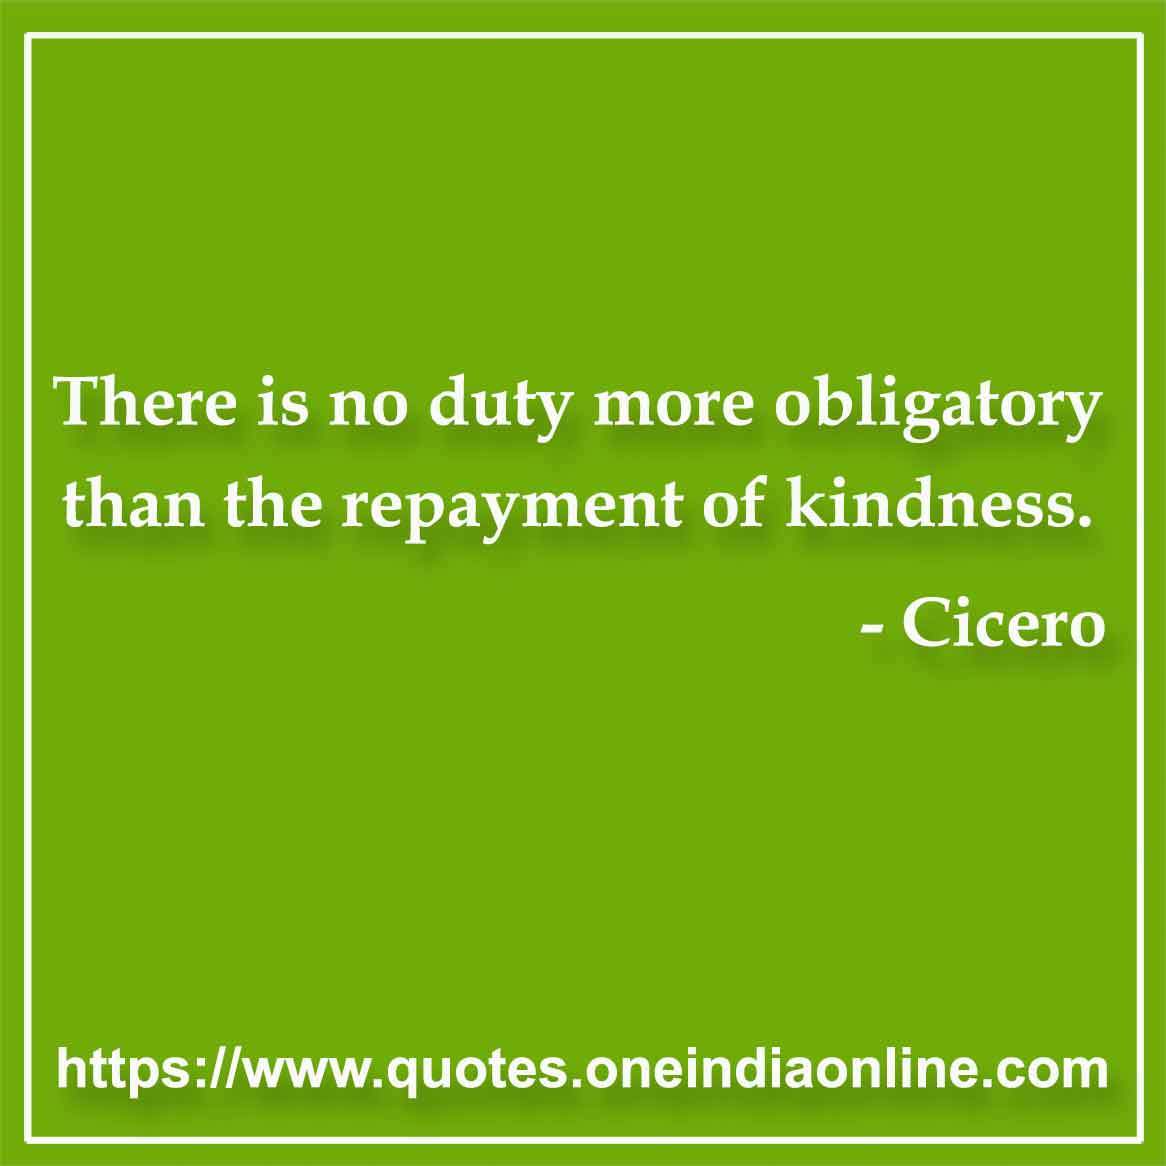 There is no duty more obligatory than the repayment of kindness.

- Kindness Quotes by Cicero 